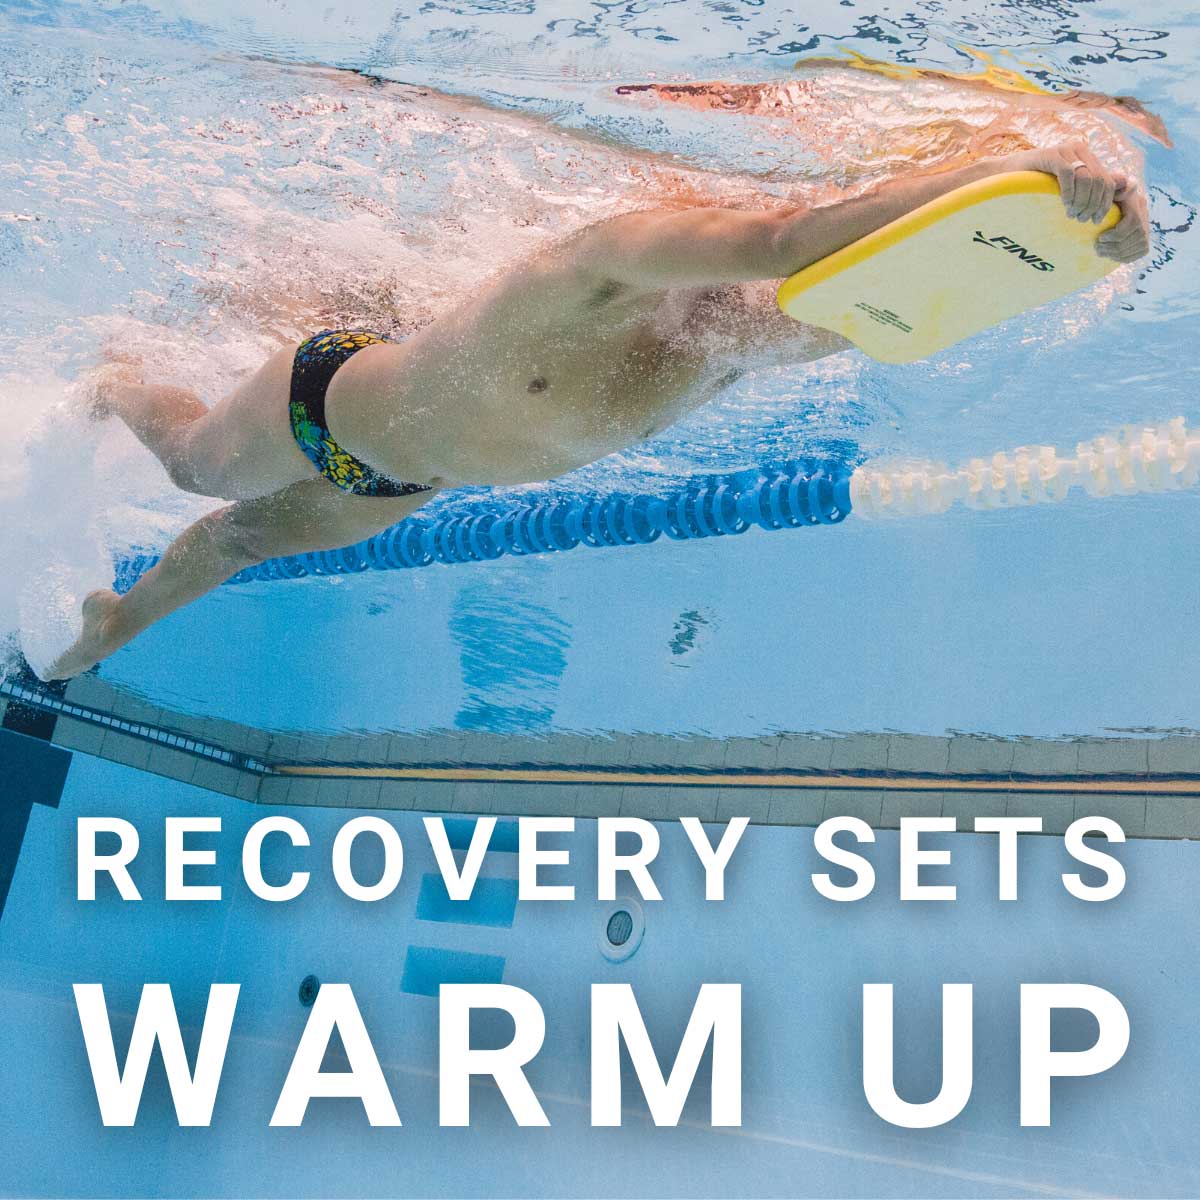 The foam KICKBOARD is perfect for recovery + warm up sets.